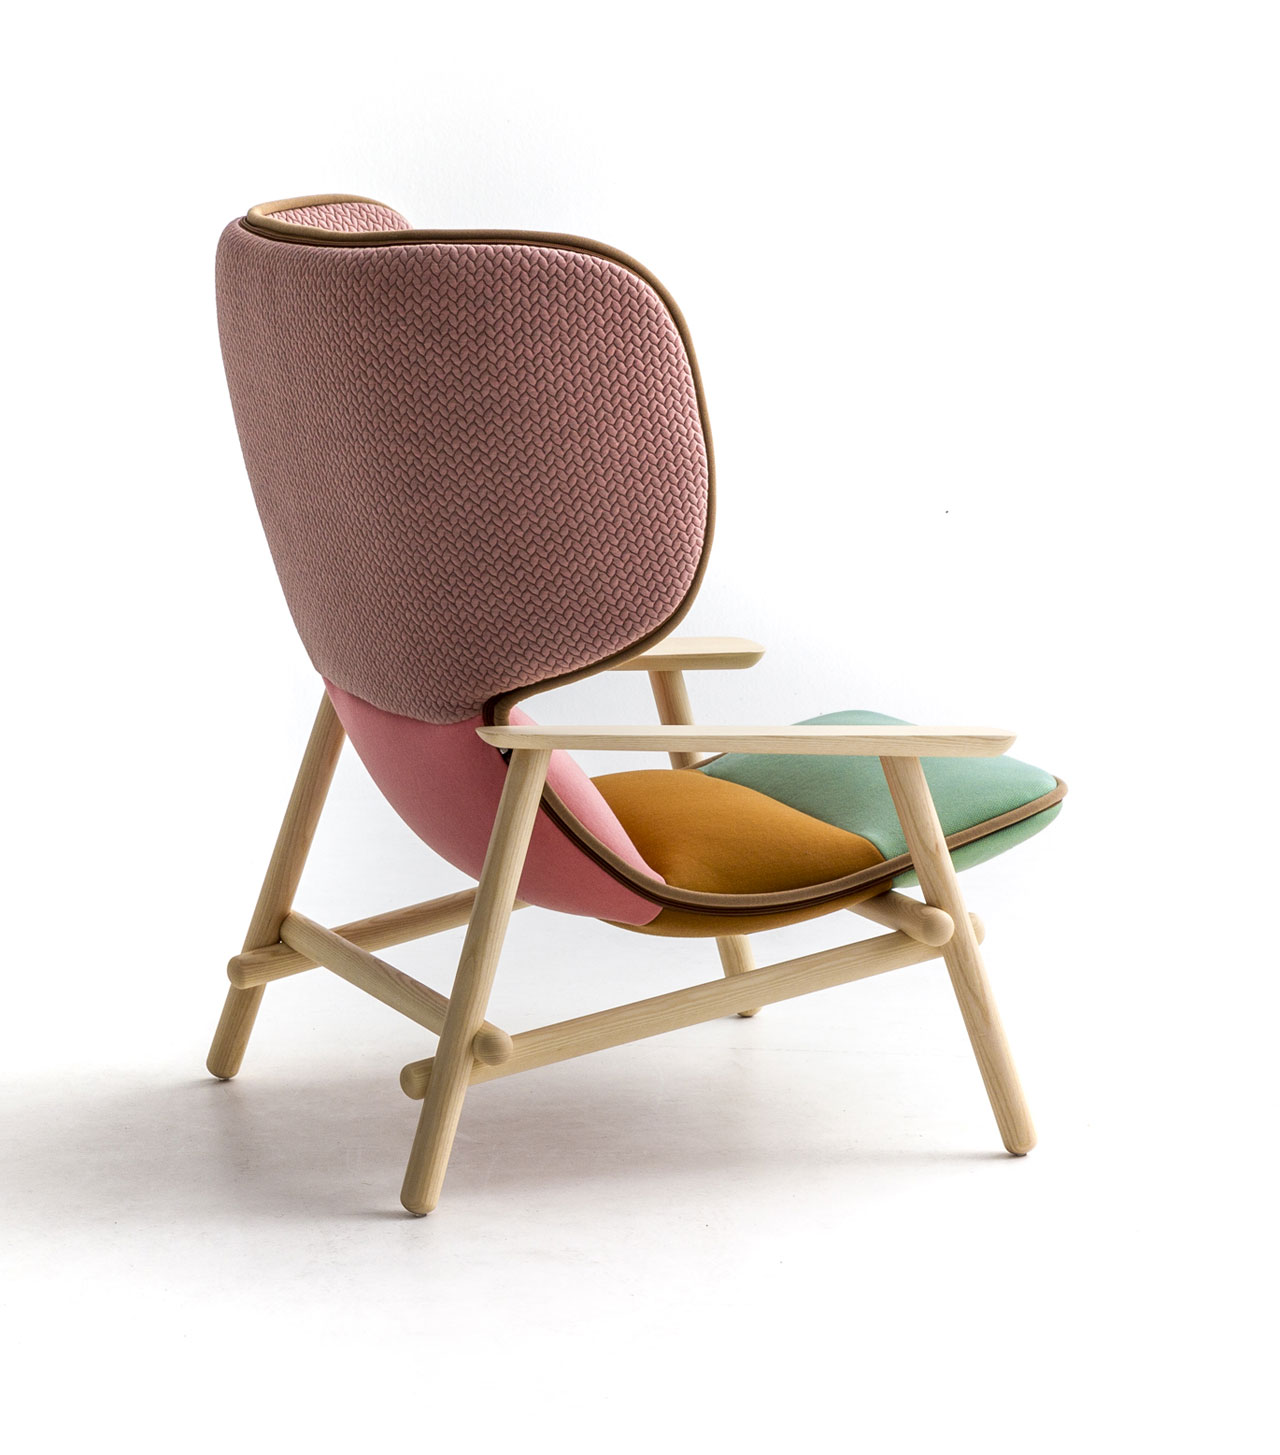 New Lilo armchairs by Patricia Urquiola for MOROSO.